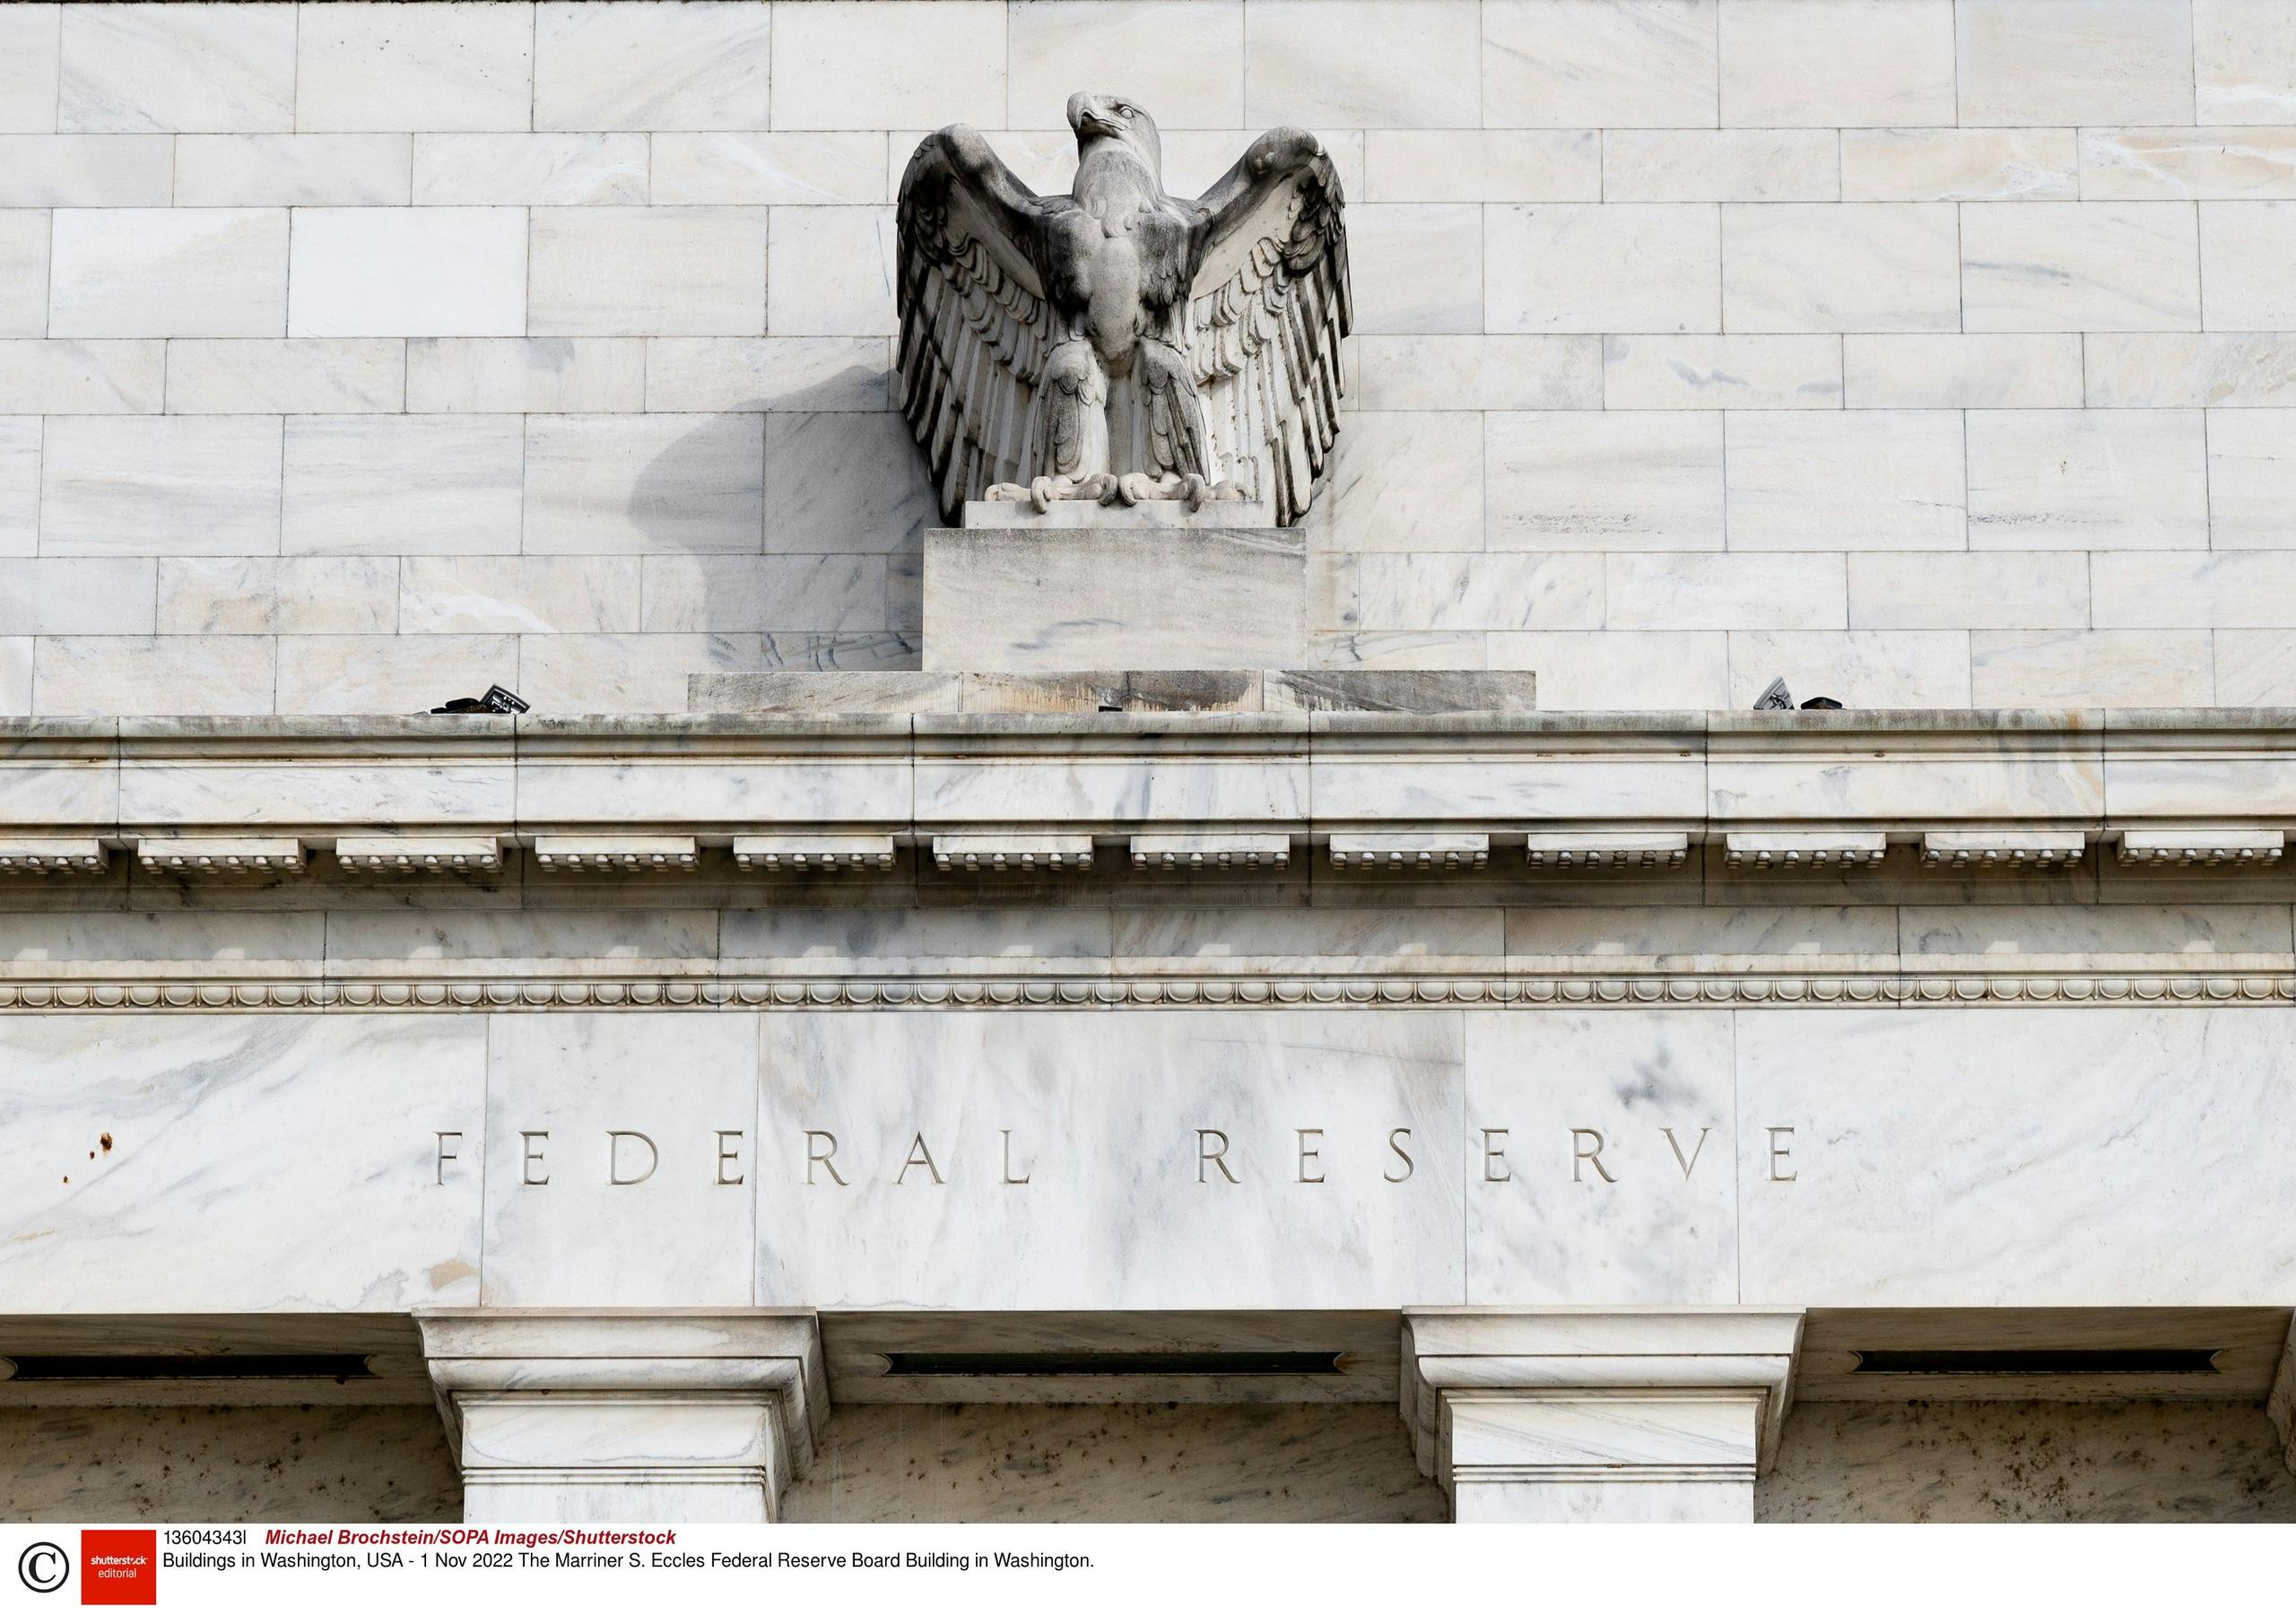 The Federal Reserve raises interest rates by 0.25 percentage points